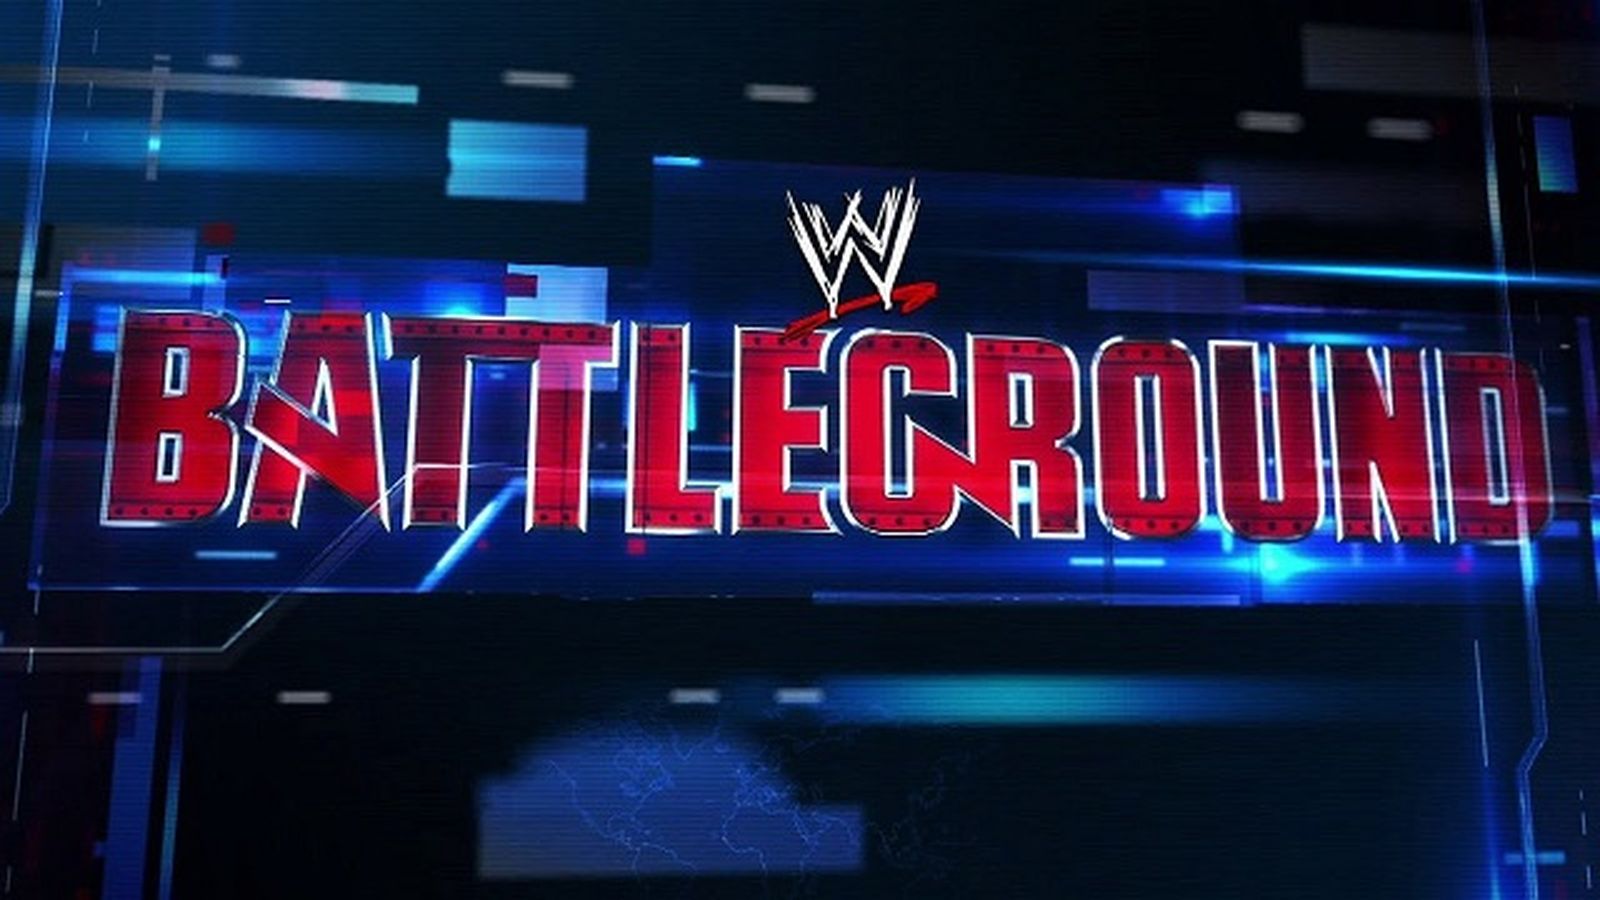 Archived: WWE Battleground 2015 Predictions - archived